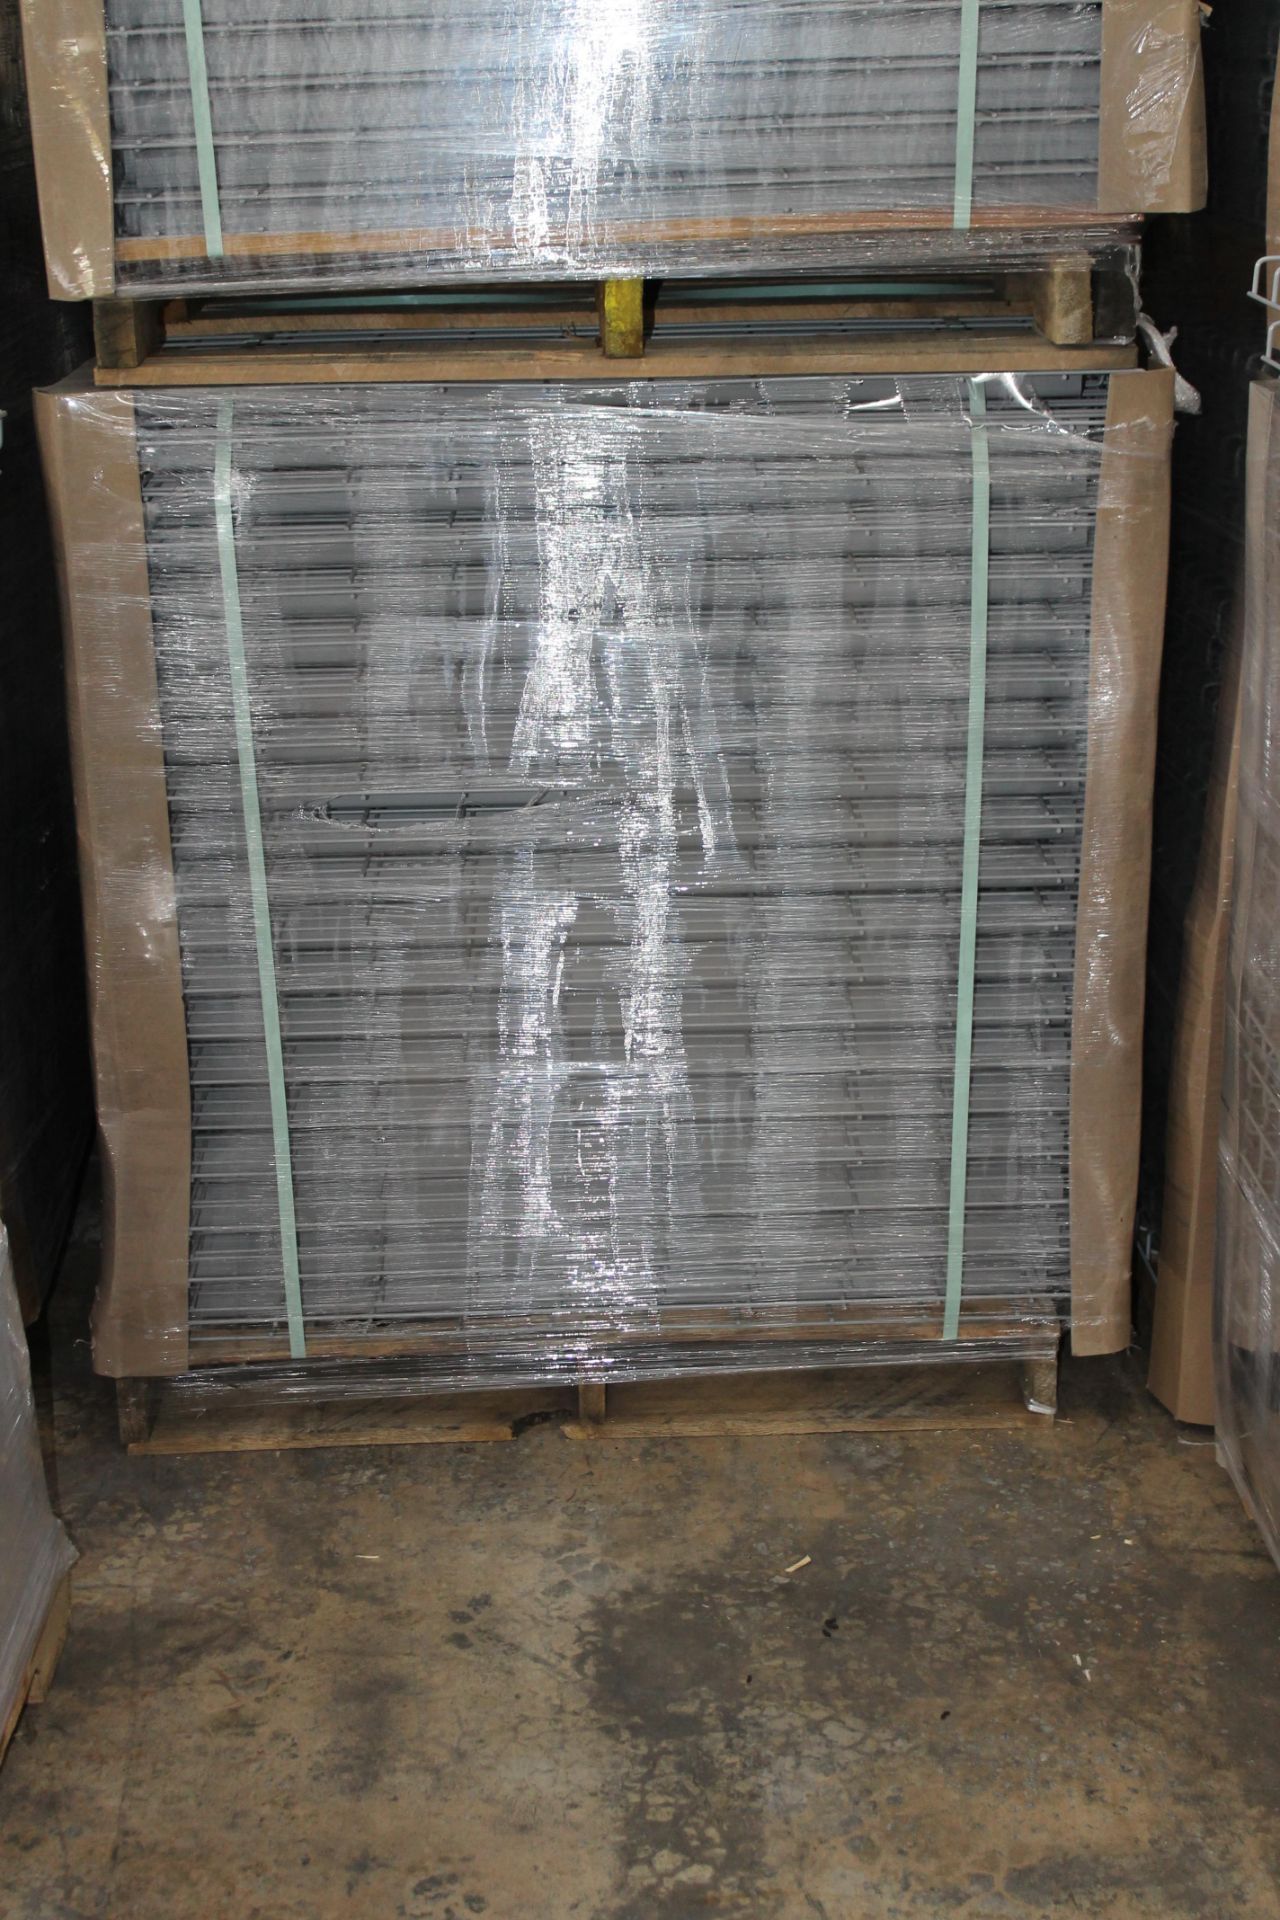 NEW 120 PCS OF STANDARD 36" X 46" WIREDECK - 2700 LBS CAPACITY